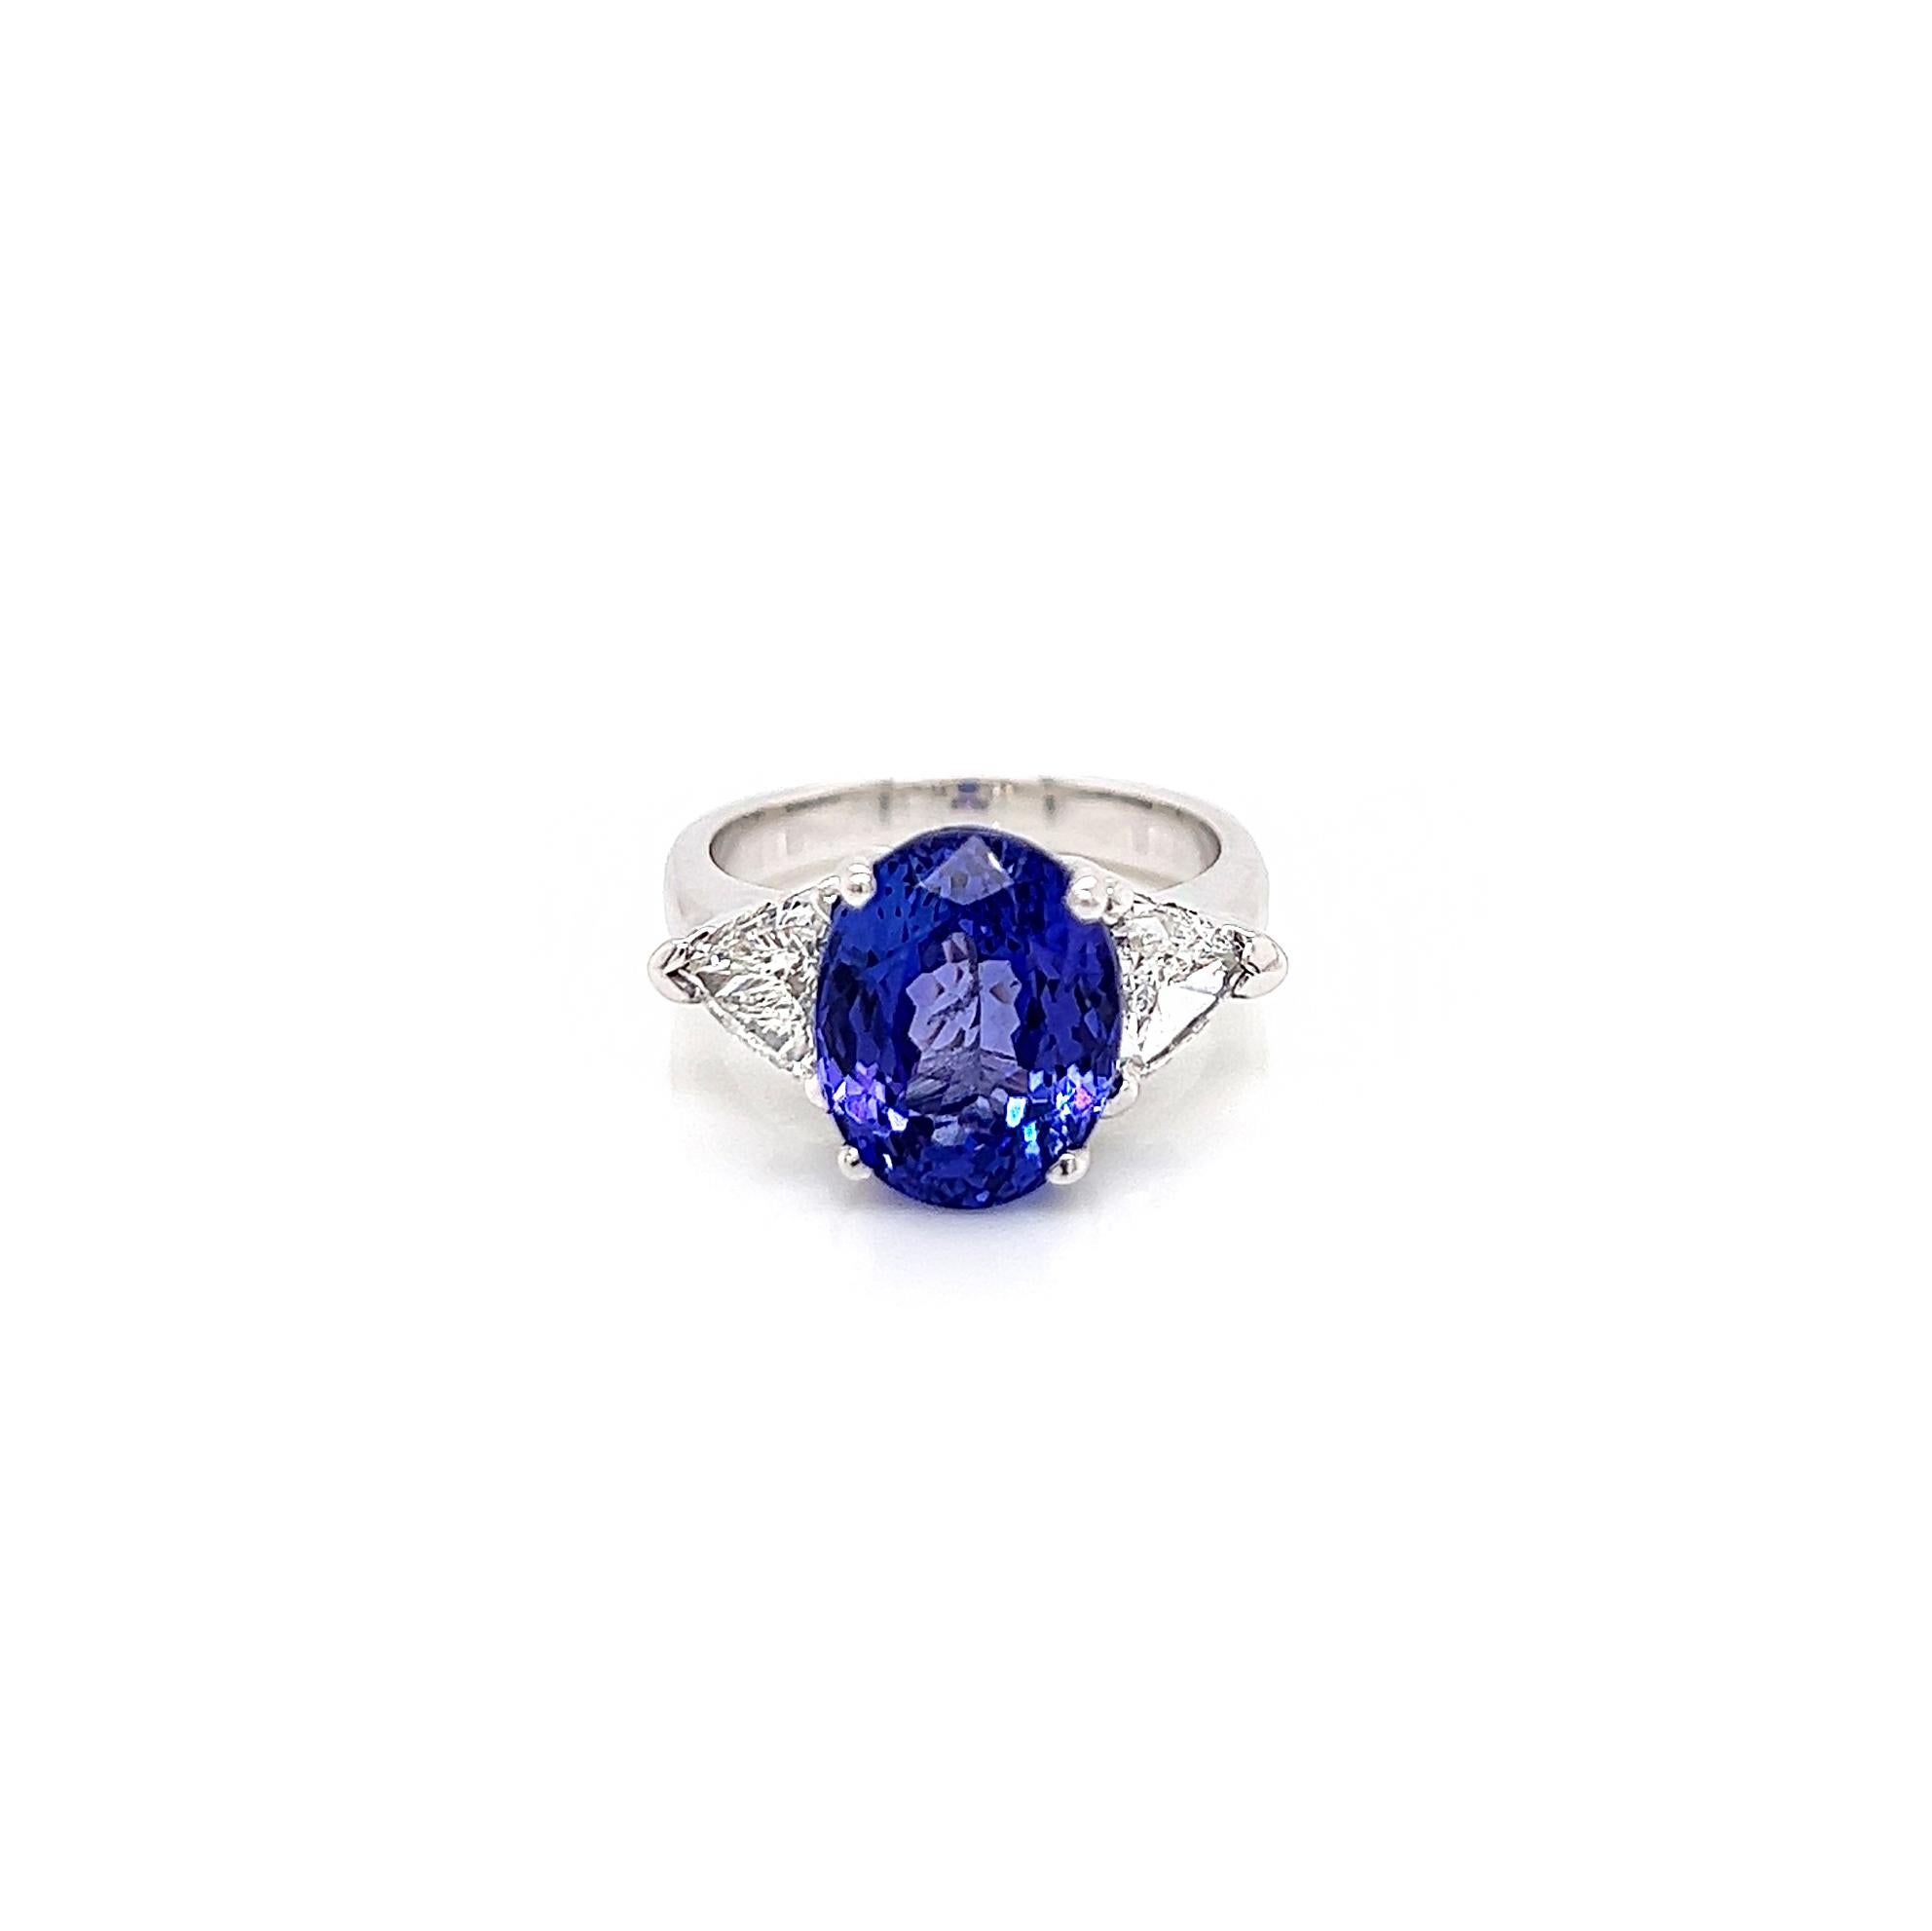 7.18 Total Carat Tanzanite and Diamond Three Stone Ladies Ring

-Metal Type: 14K White Gold
-5.46 Carat Oval Cut Natural AAA Quality Tanzanite 
-1.72 Carat Brilliant Cut Natural side Diamonds. G Color, VS1-VS2 Clarity 

-Size 6.5

Made in New York